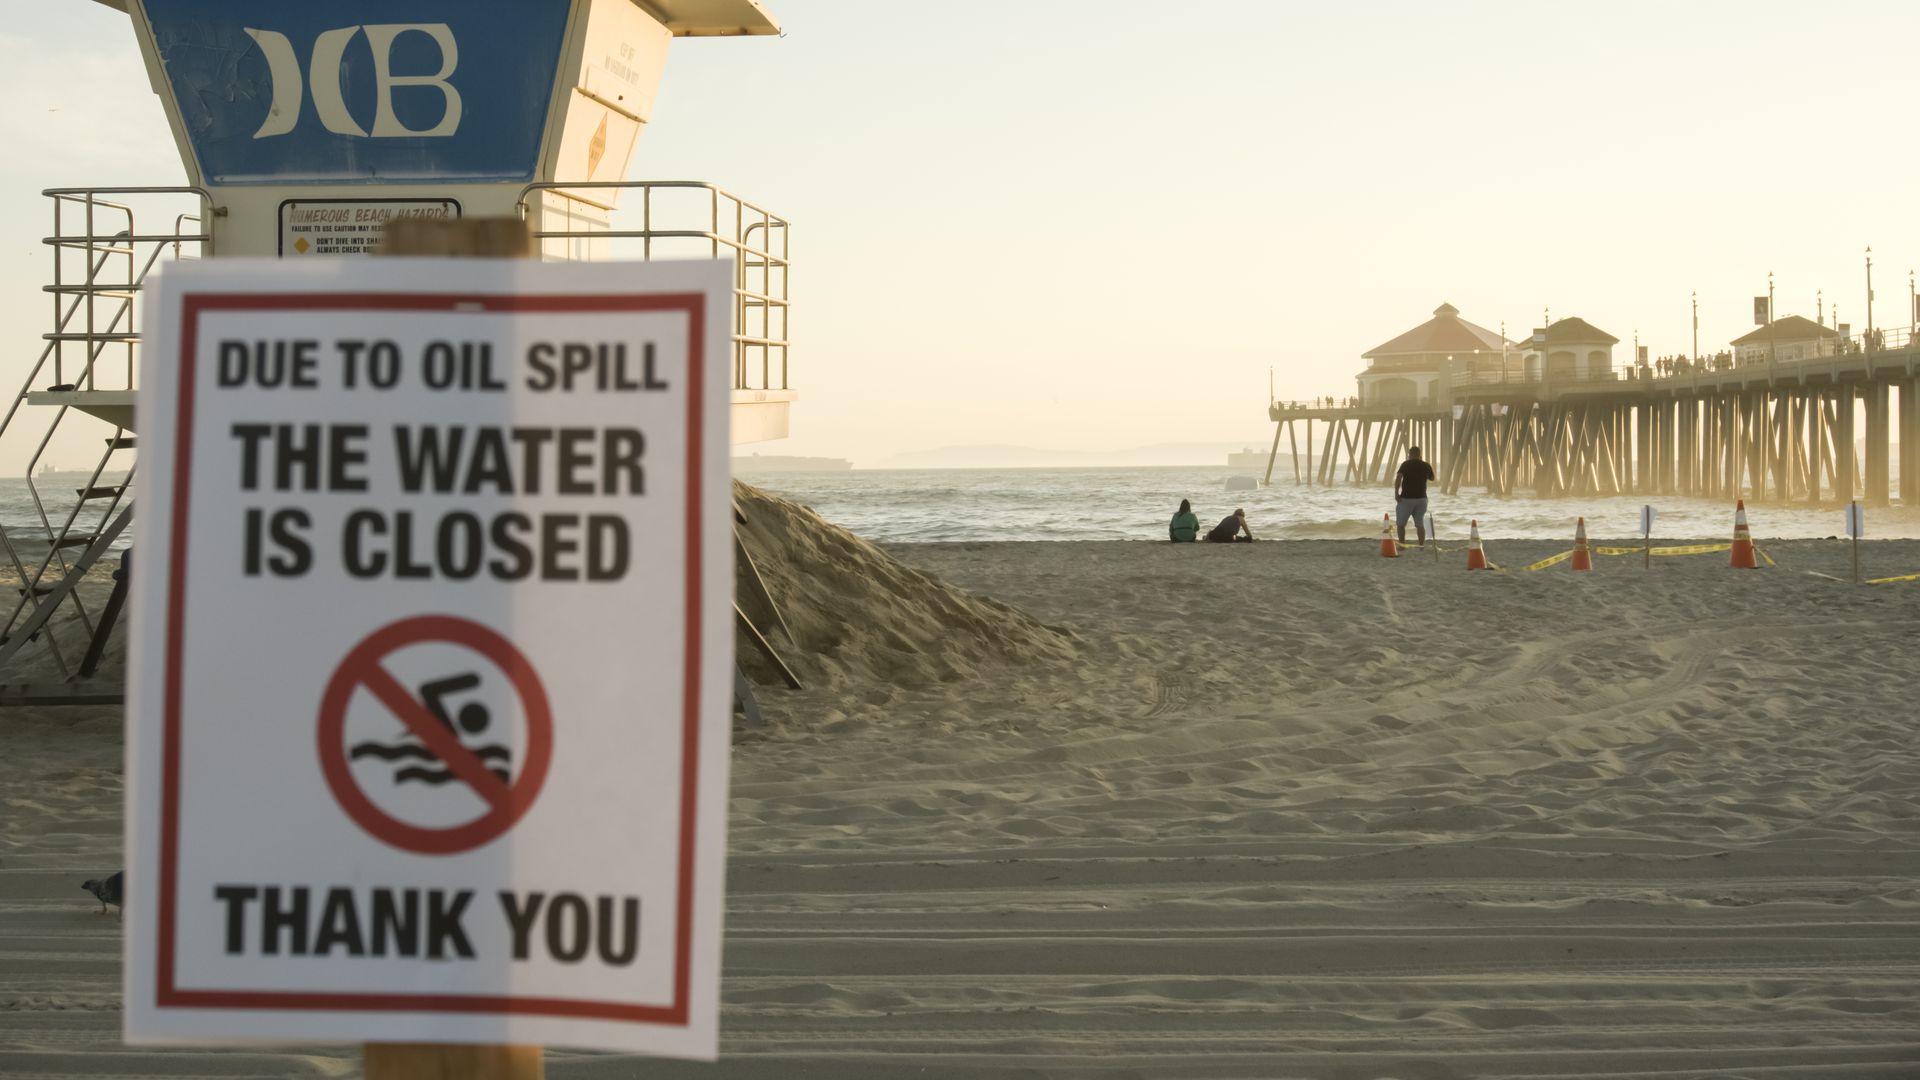 A warning sign for an oil spill in Huntington Beach